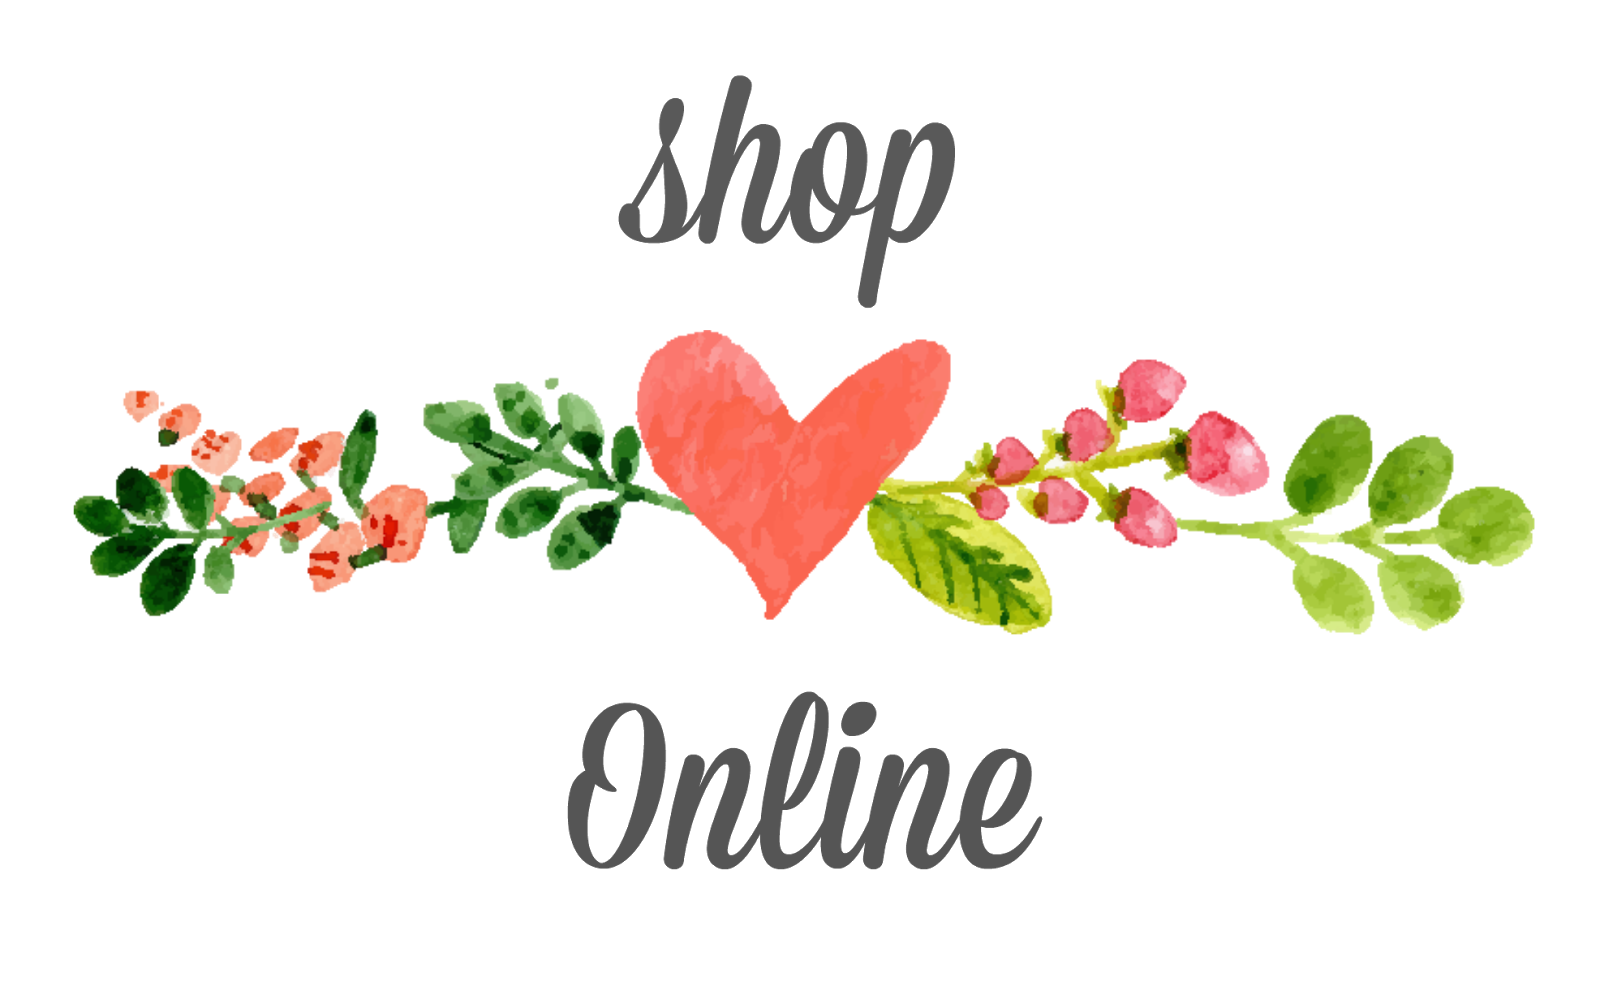 One love shop. Love shop. Dream shop one Love logo. From Love logo Flower. Wall Art PNG.